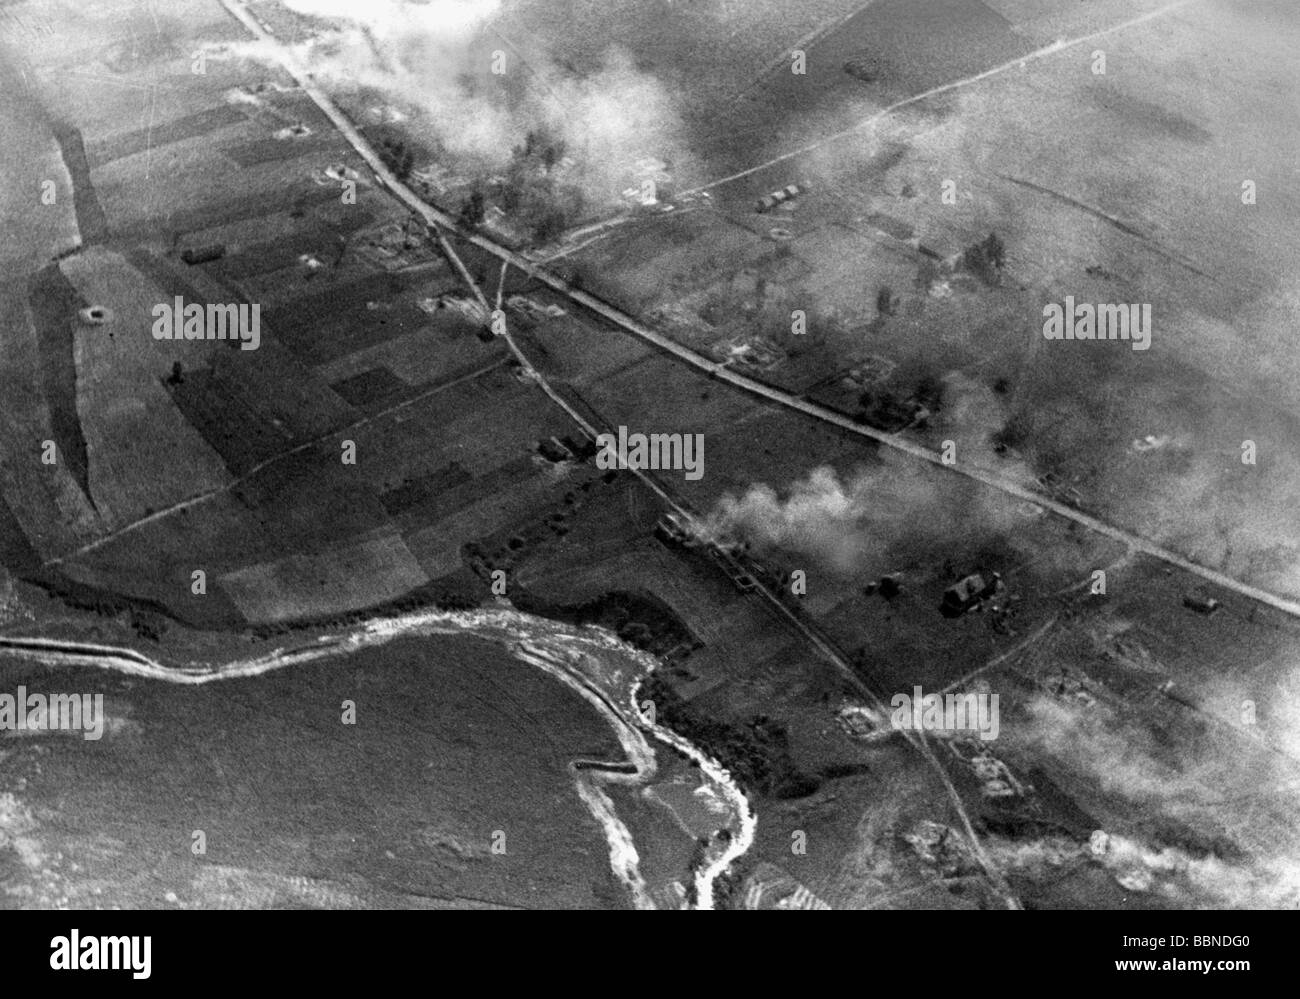 events, Second World War / WWII, aerial warfare, bombs / bombings, bombed landscape, Eastern Front, circa 1942, Stock Photo